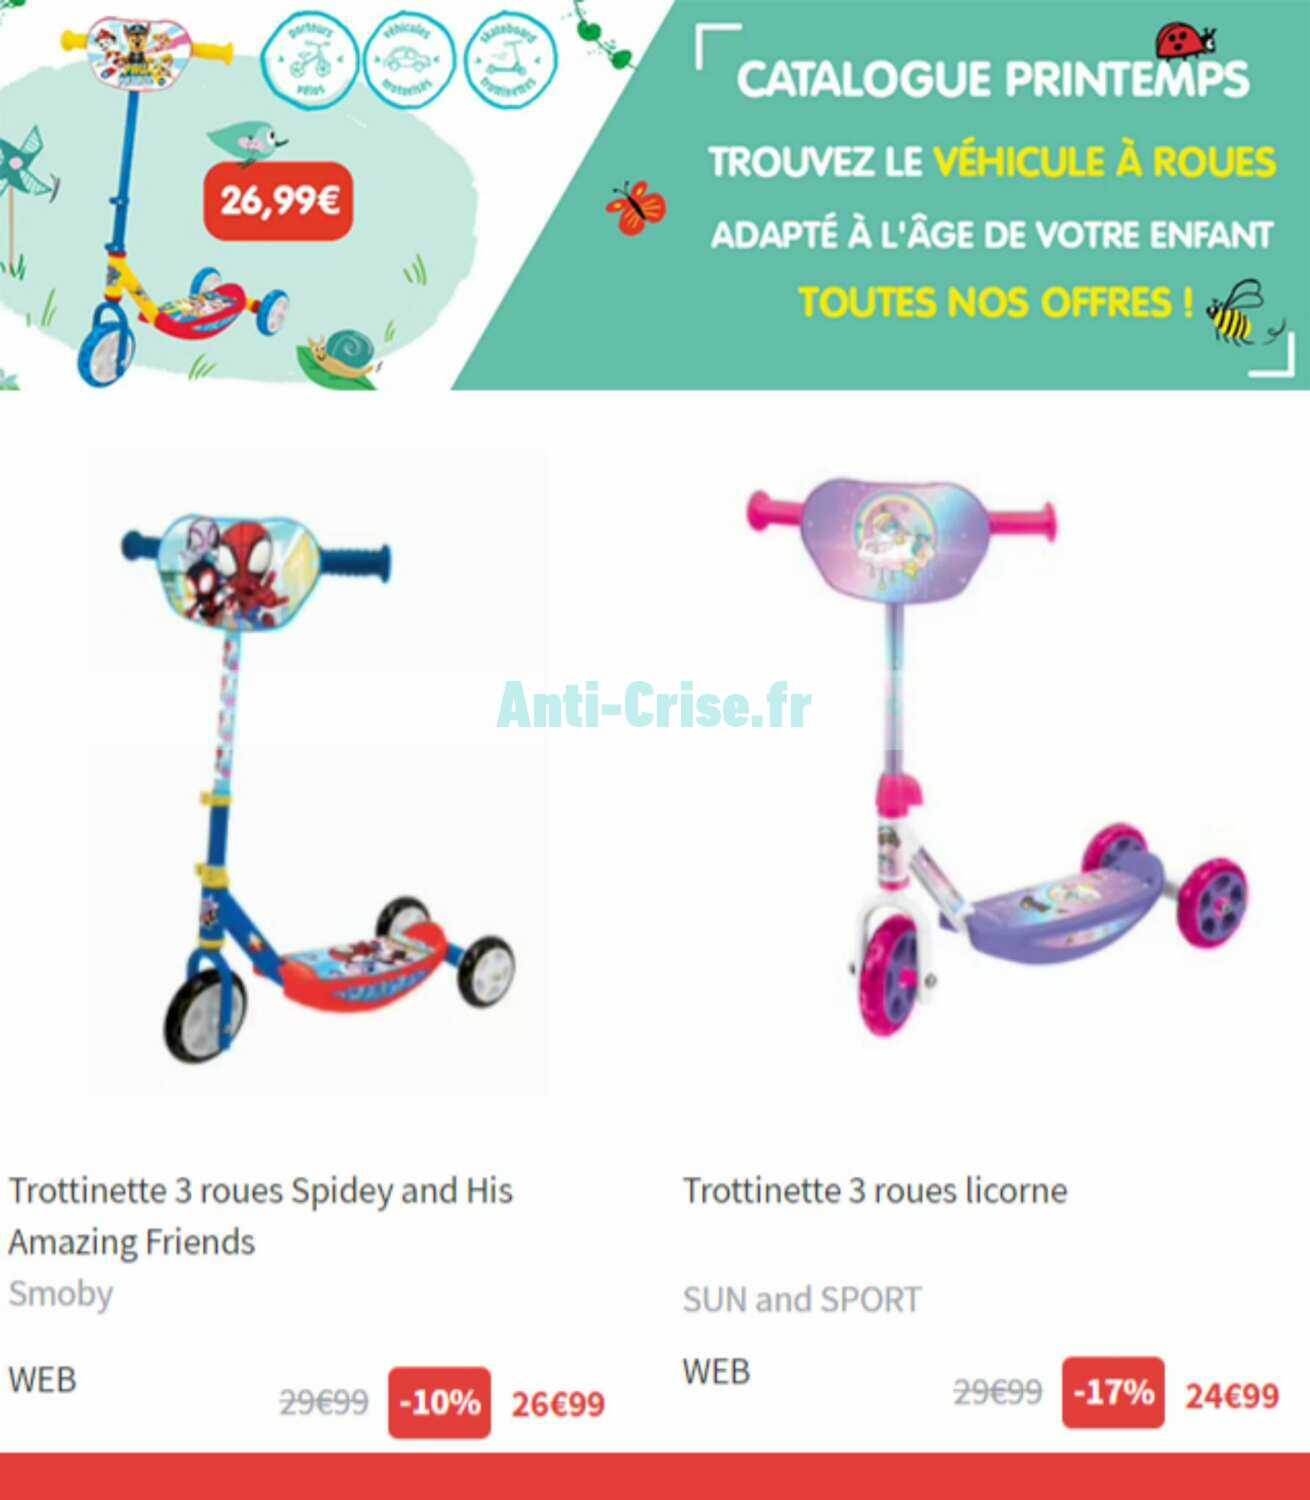 Trottinette 3 roues licorne SUN and SPORT : King Jouet